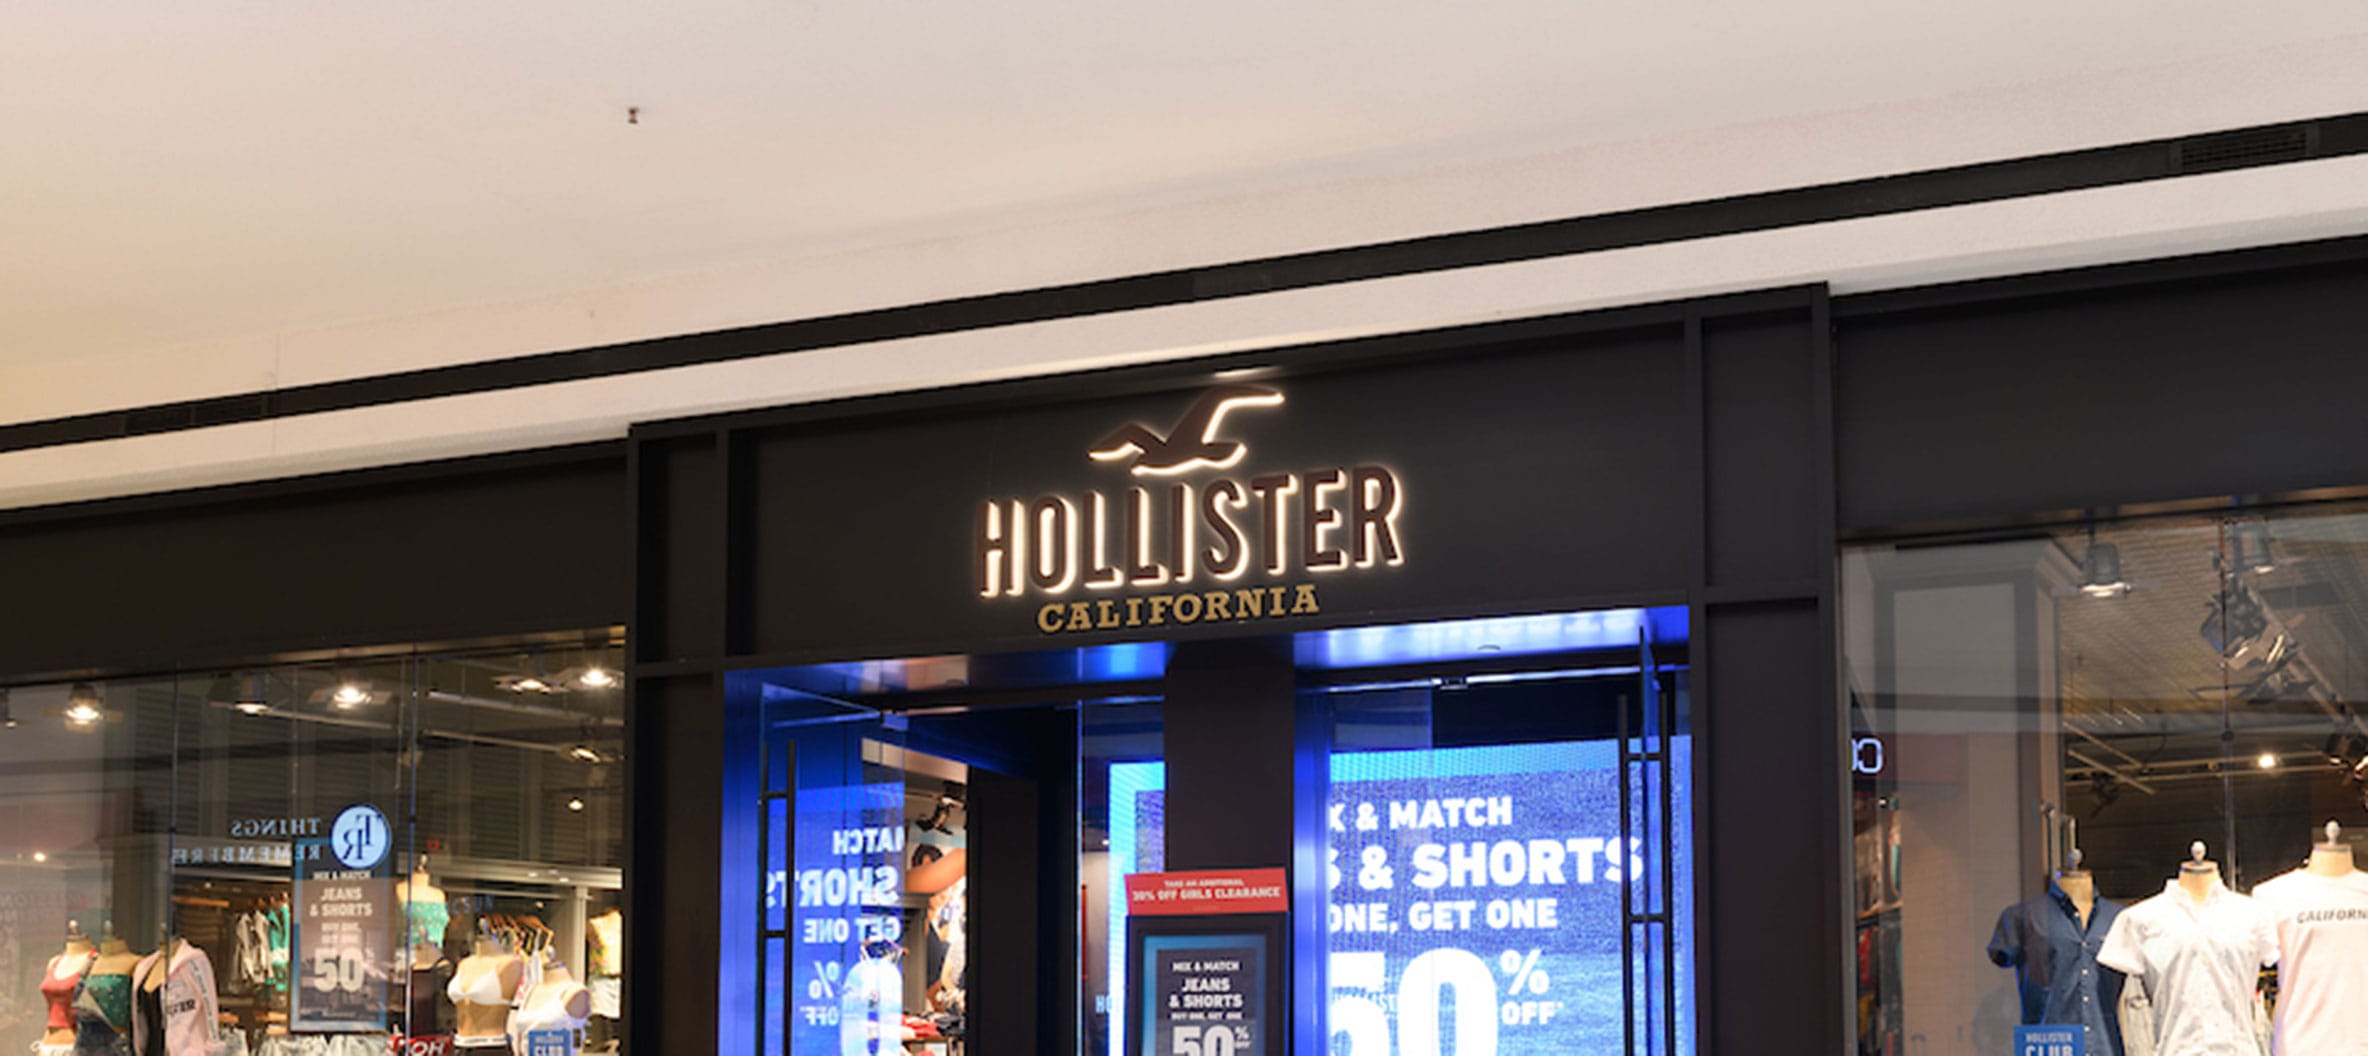 where is hollister located in the mall